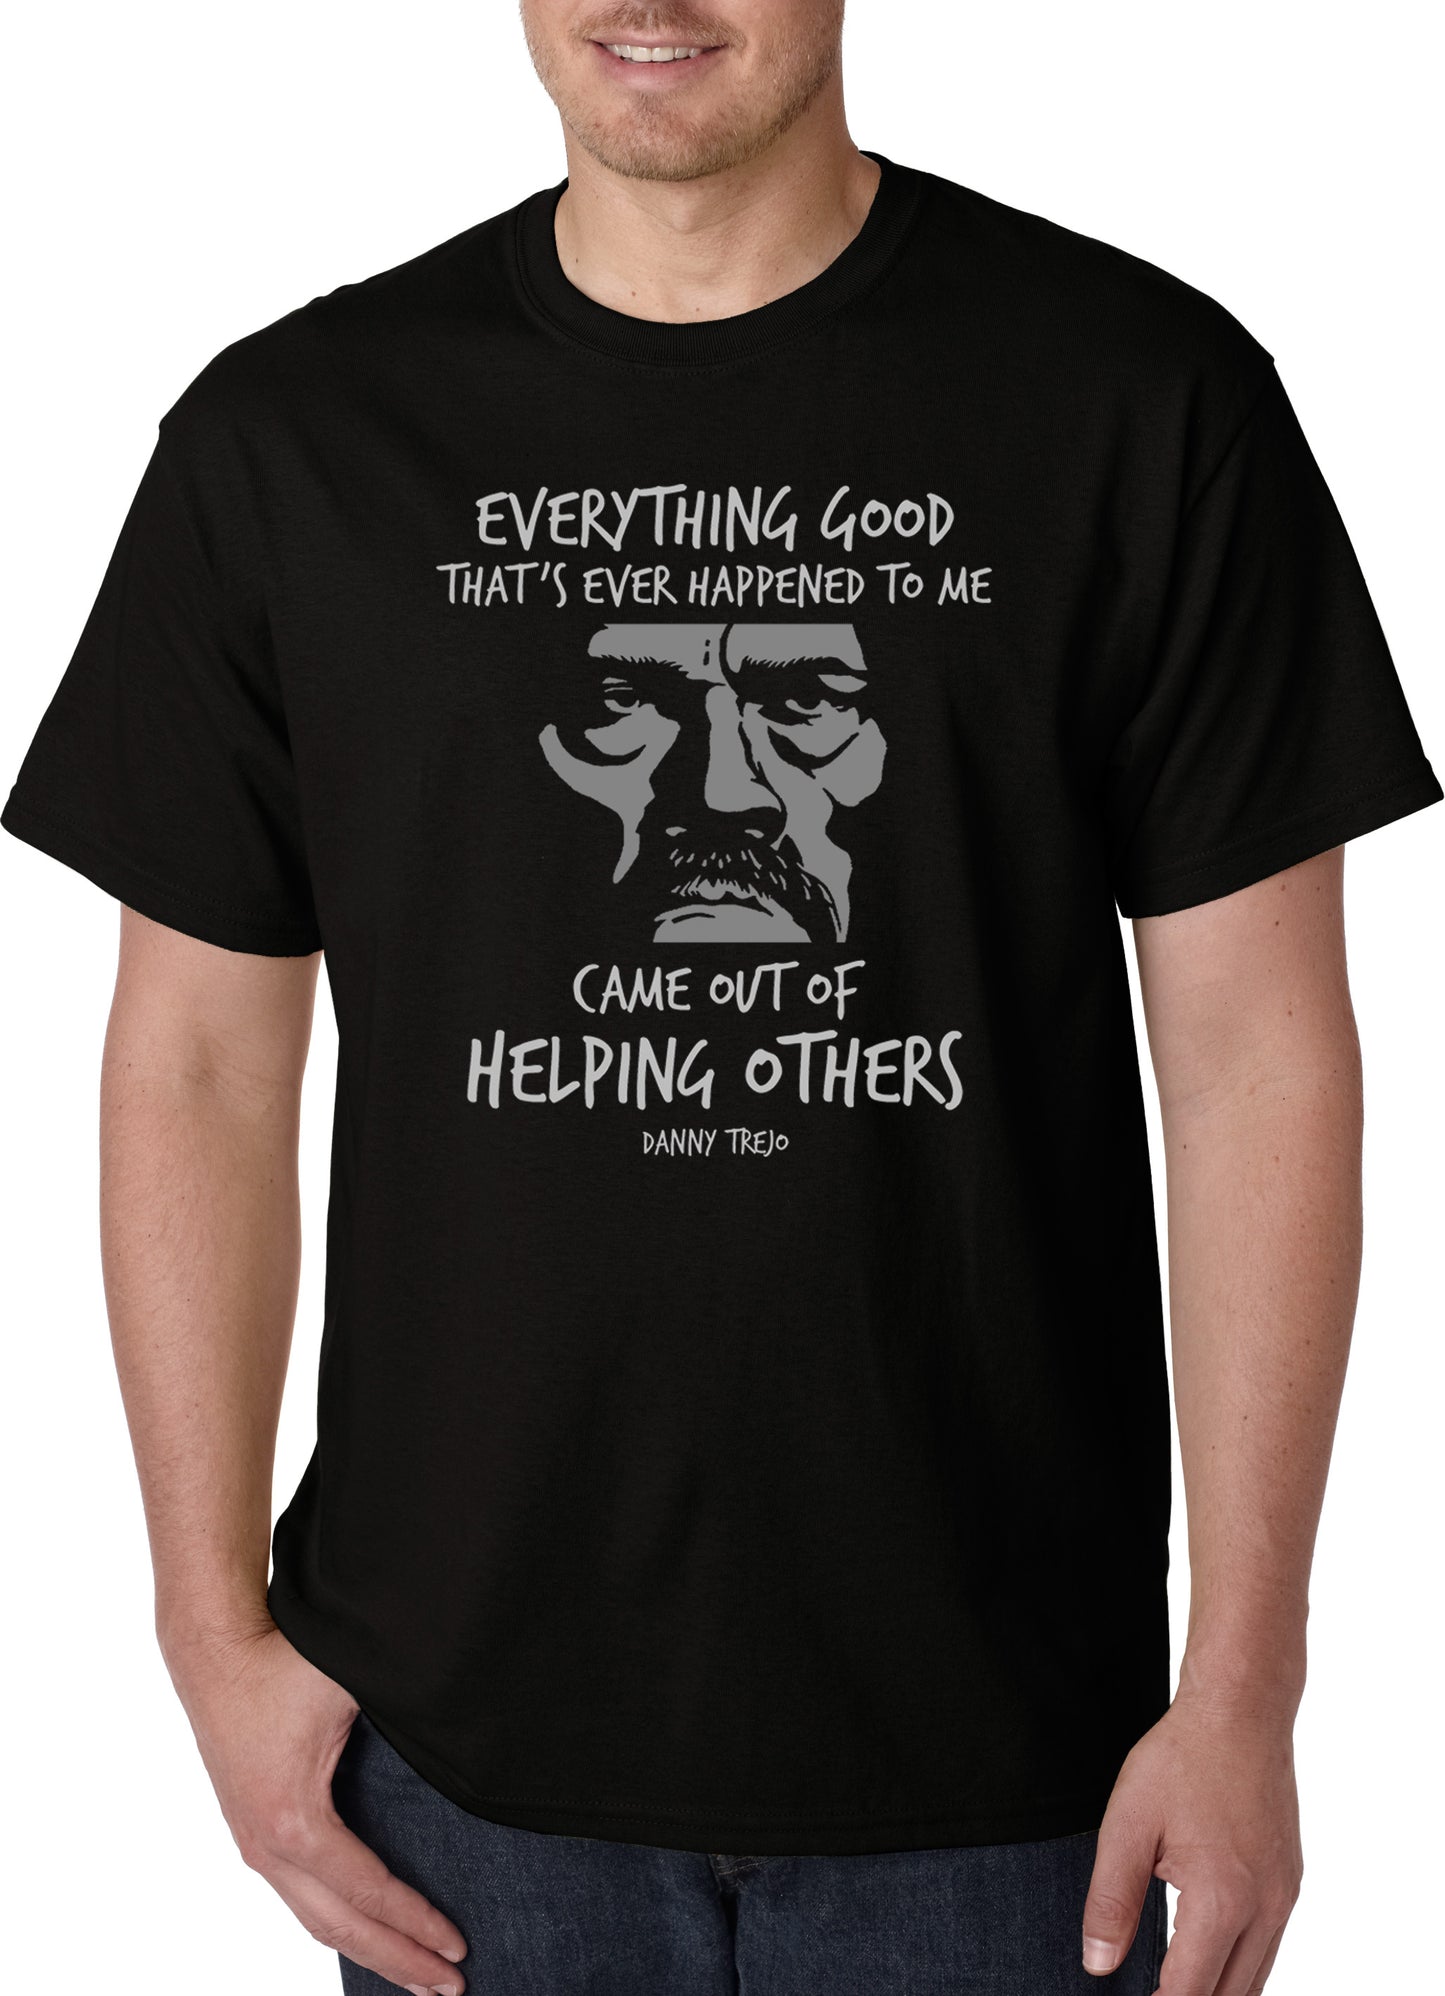 Danny Trejo "Everything Good" quote t-shirt